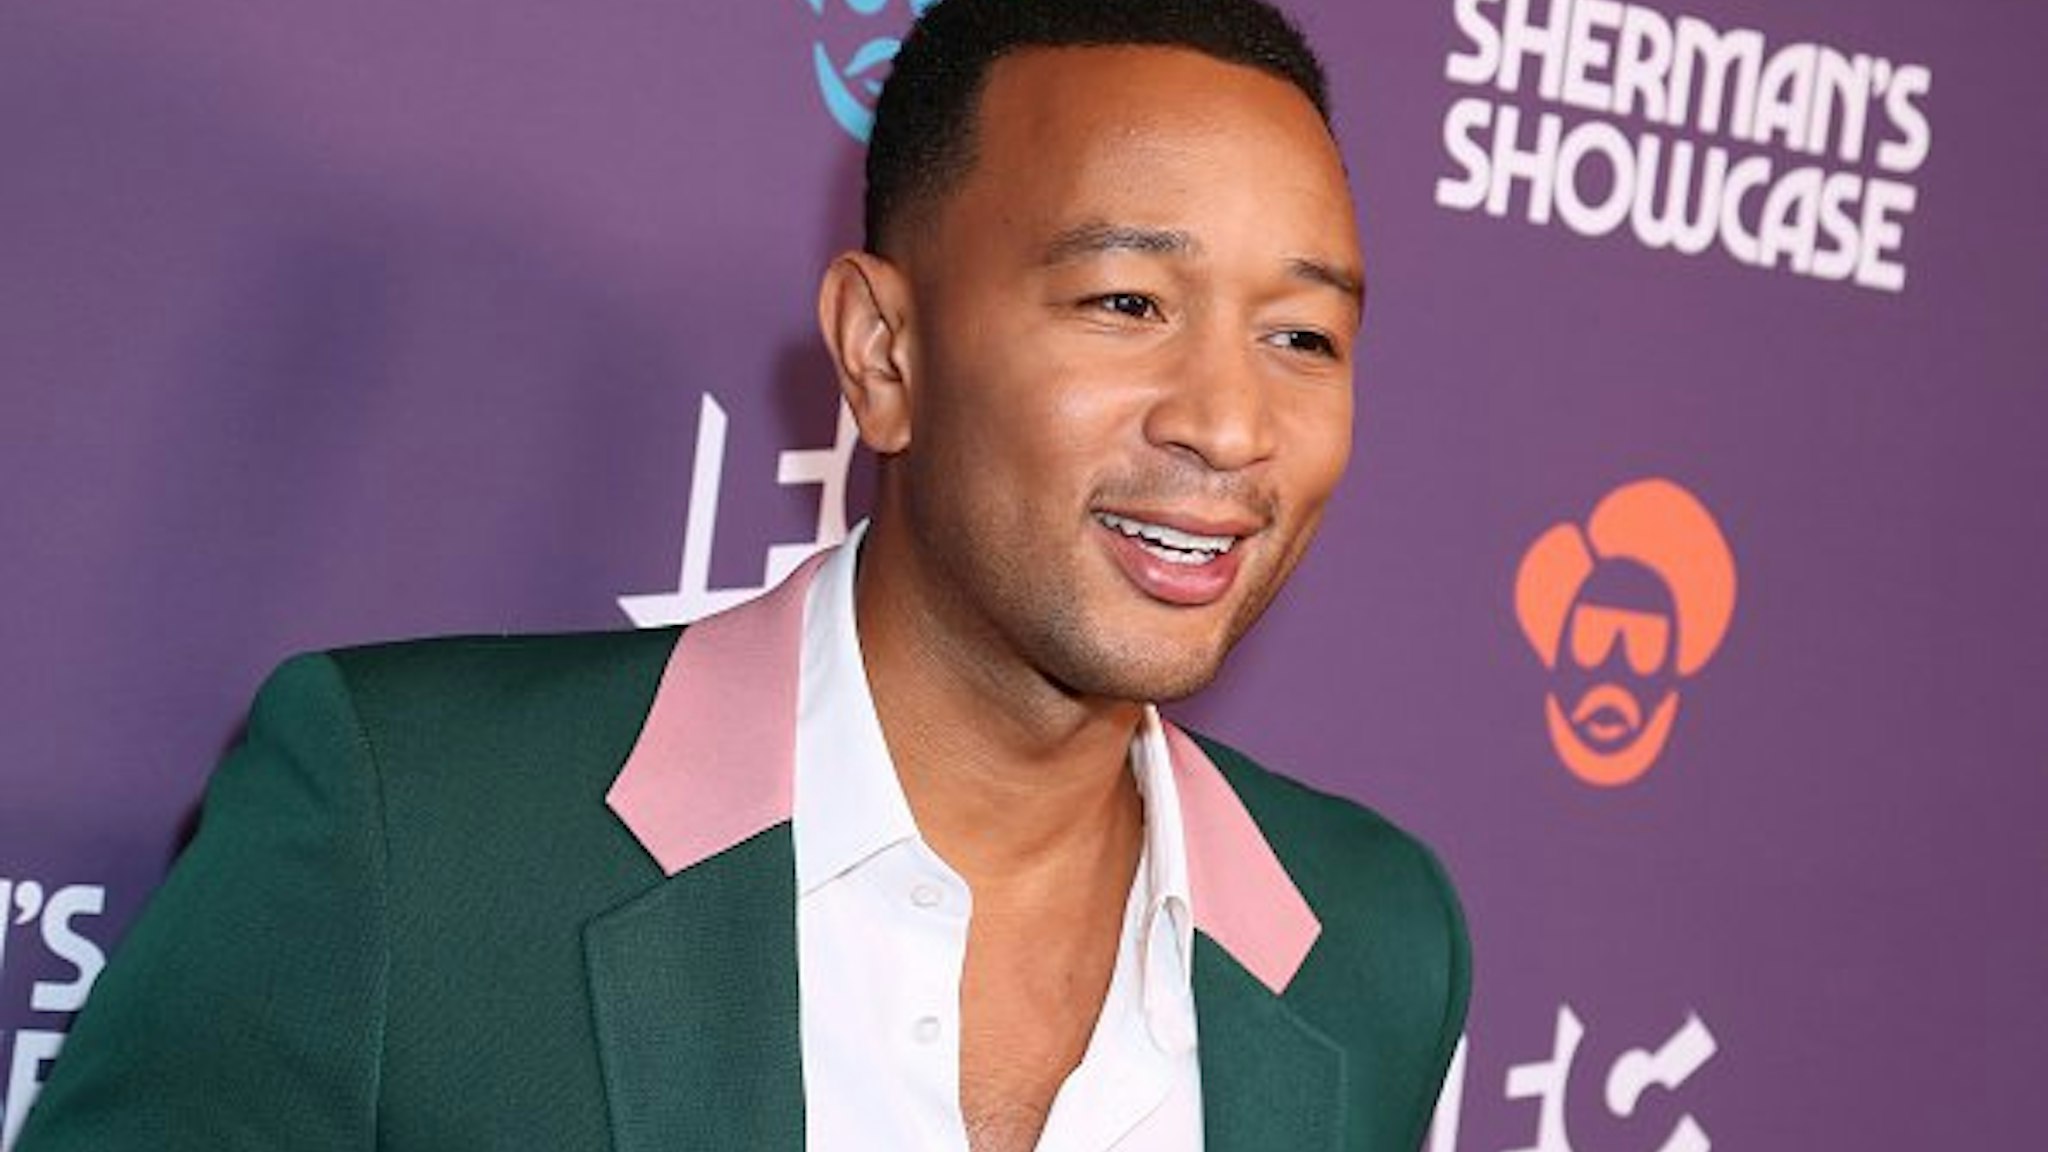 John Legend attends the Los Angeles Series Premiere Of IFC's New Variety Sketch Show "Sherman's Showcase" at The Peppermint Club on July 30, 2019 in Los Angeles, California.